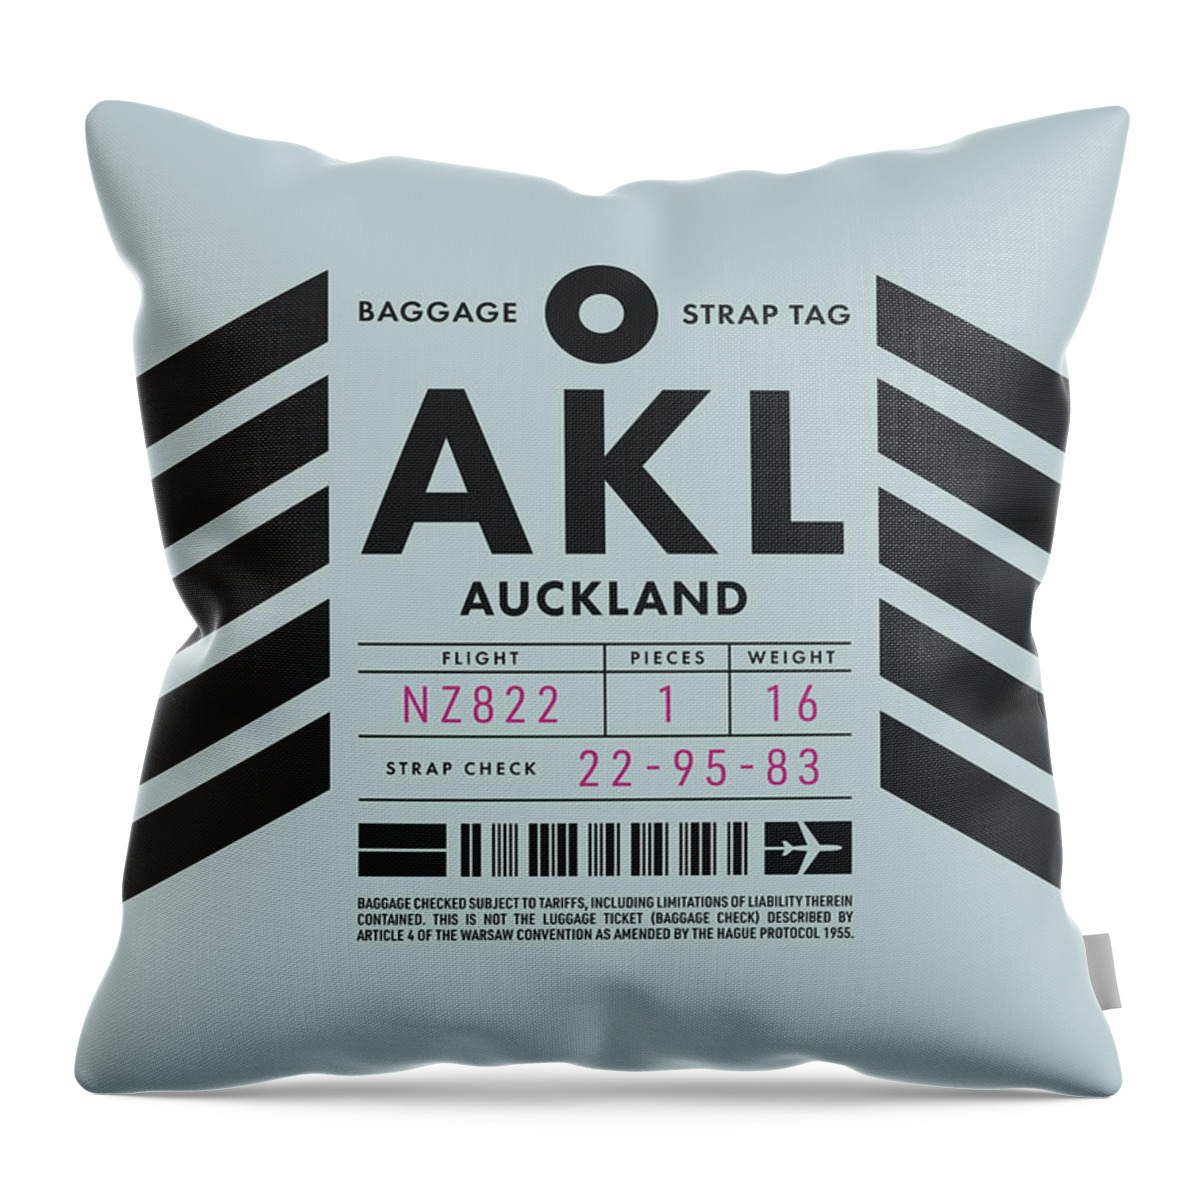 Airline Throw Pillow featuring the digital art Baggage Tag D - AKL Auckland New Zealand by Organic Synthesis